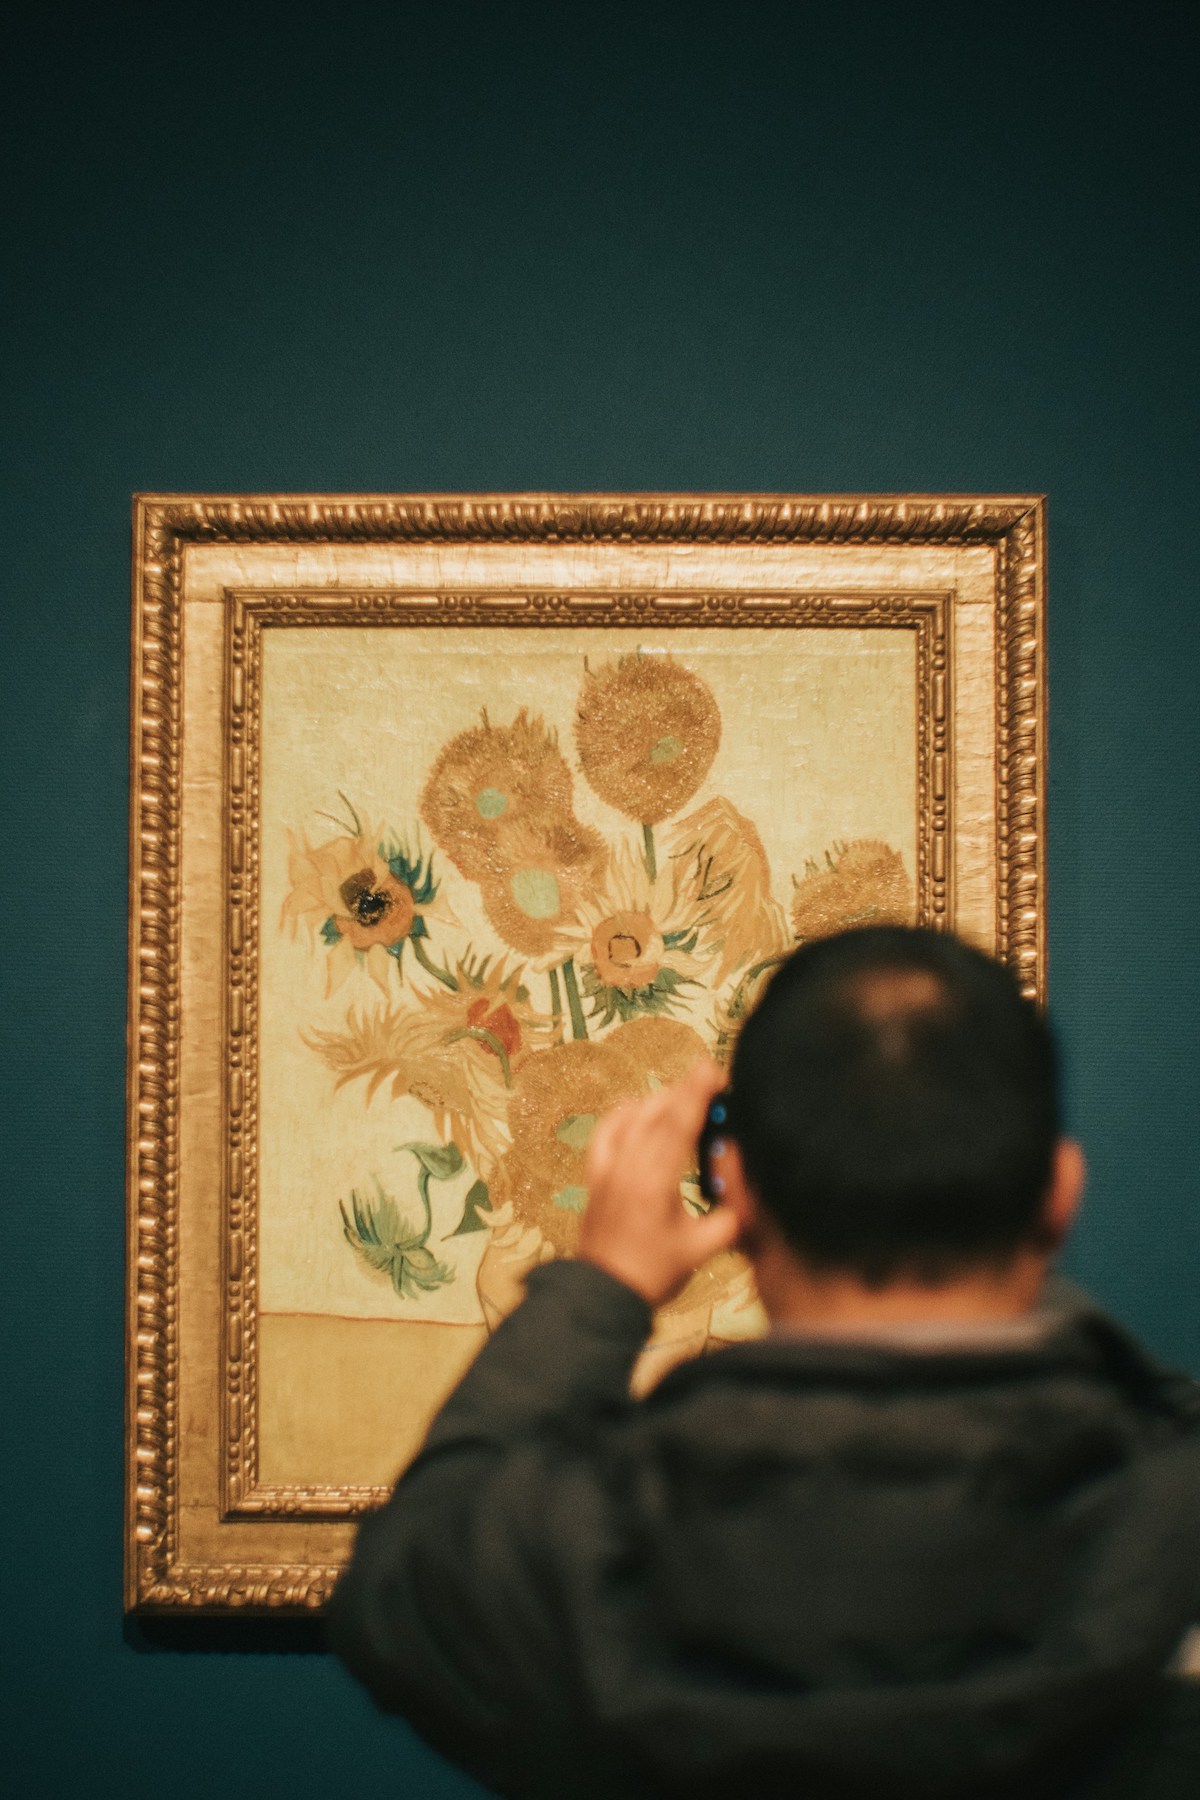 Famous Sunflowers painting with person looking at it.